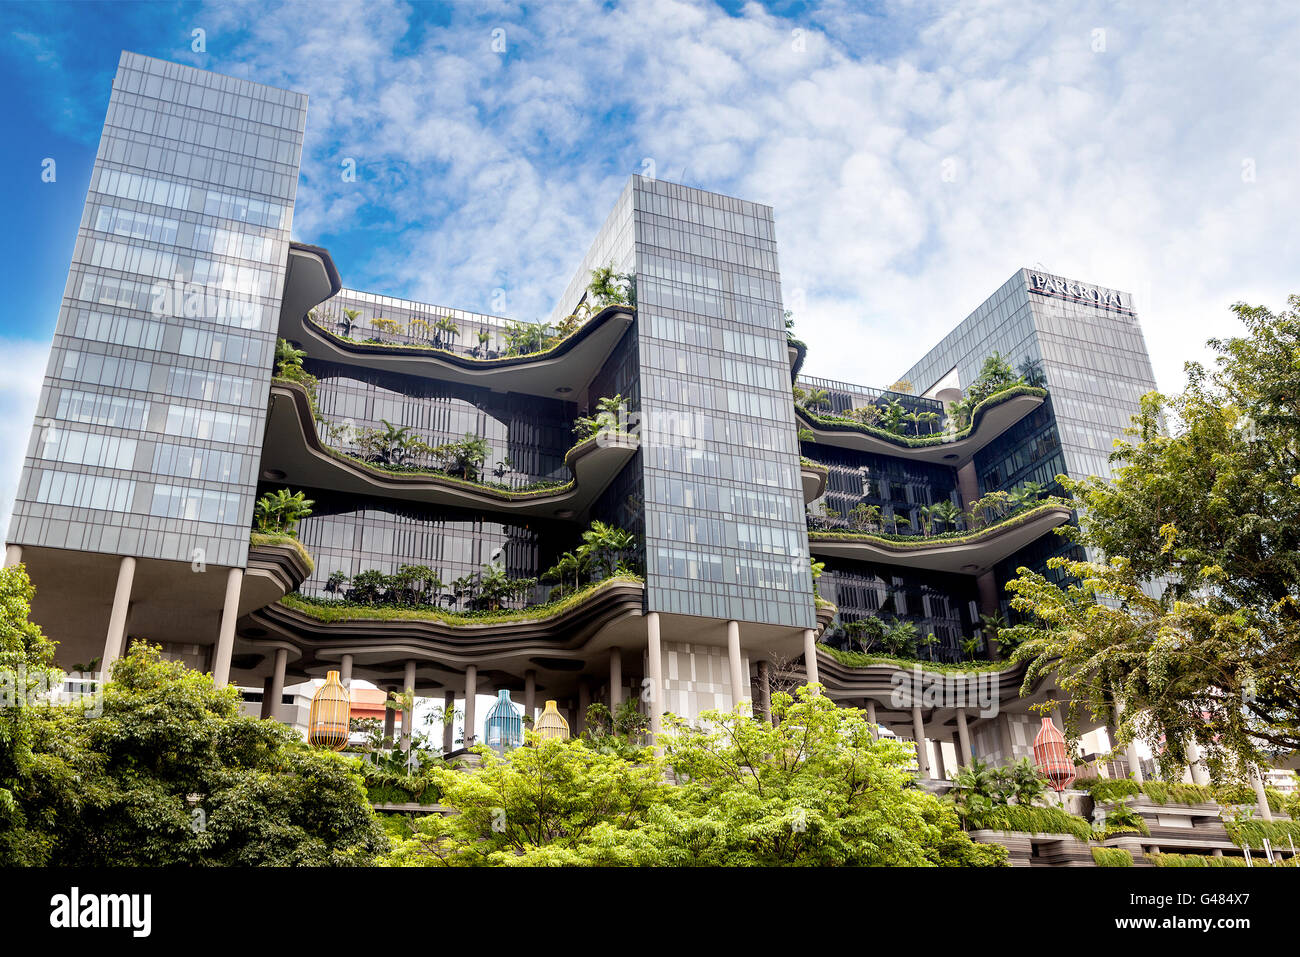 Singapore, Singapore - December 11, 2014: PARKROYAL Hotel in the financial hub of Singapore. With its unique hotel-in-a-garden d Stock Photo